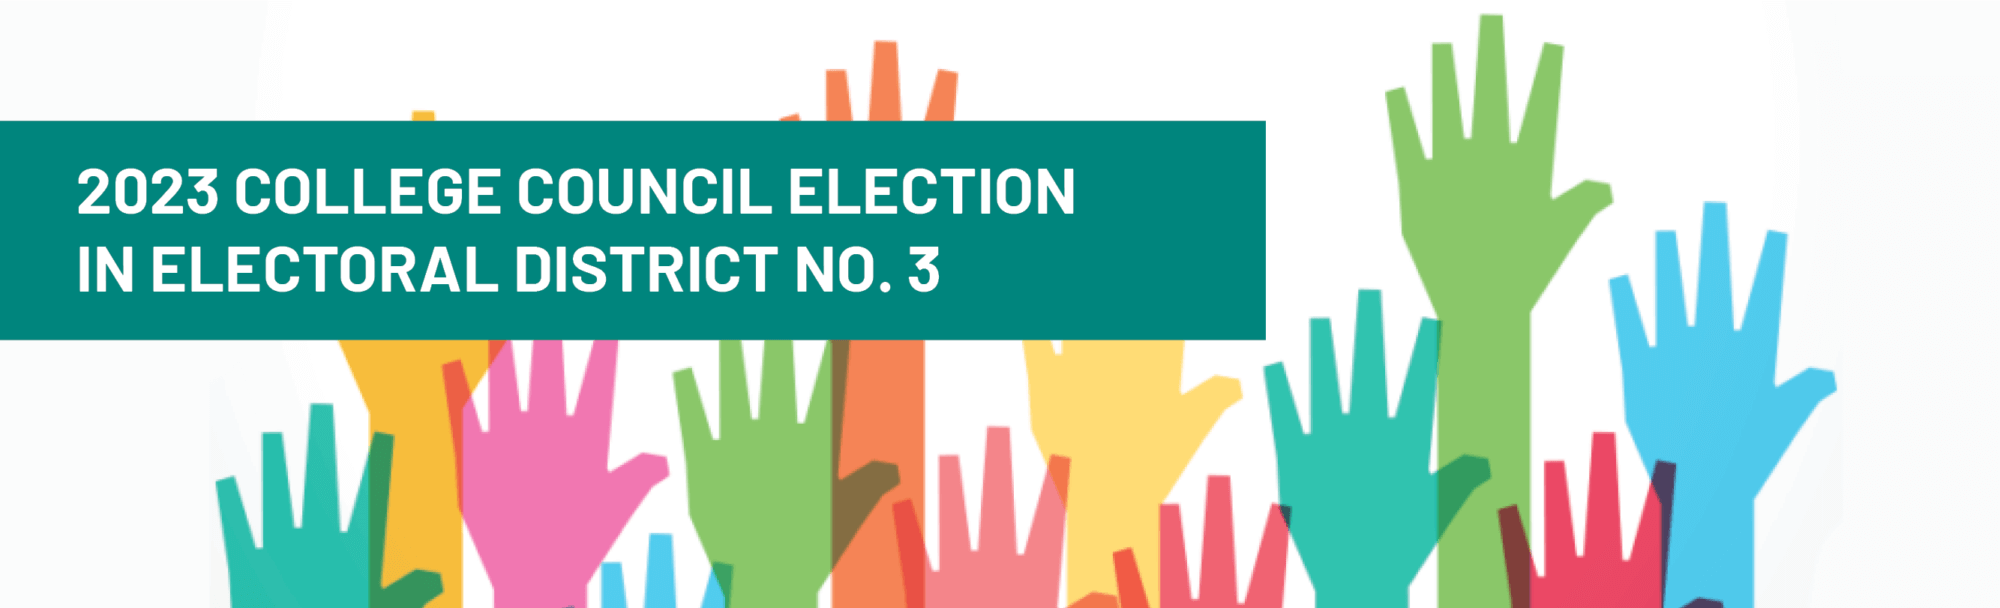 2023 College Council Election for Electoral District. No 3